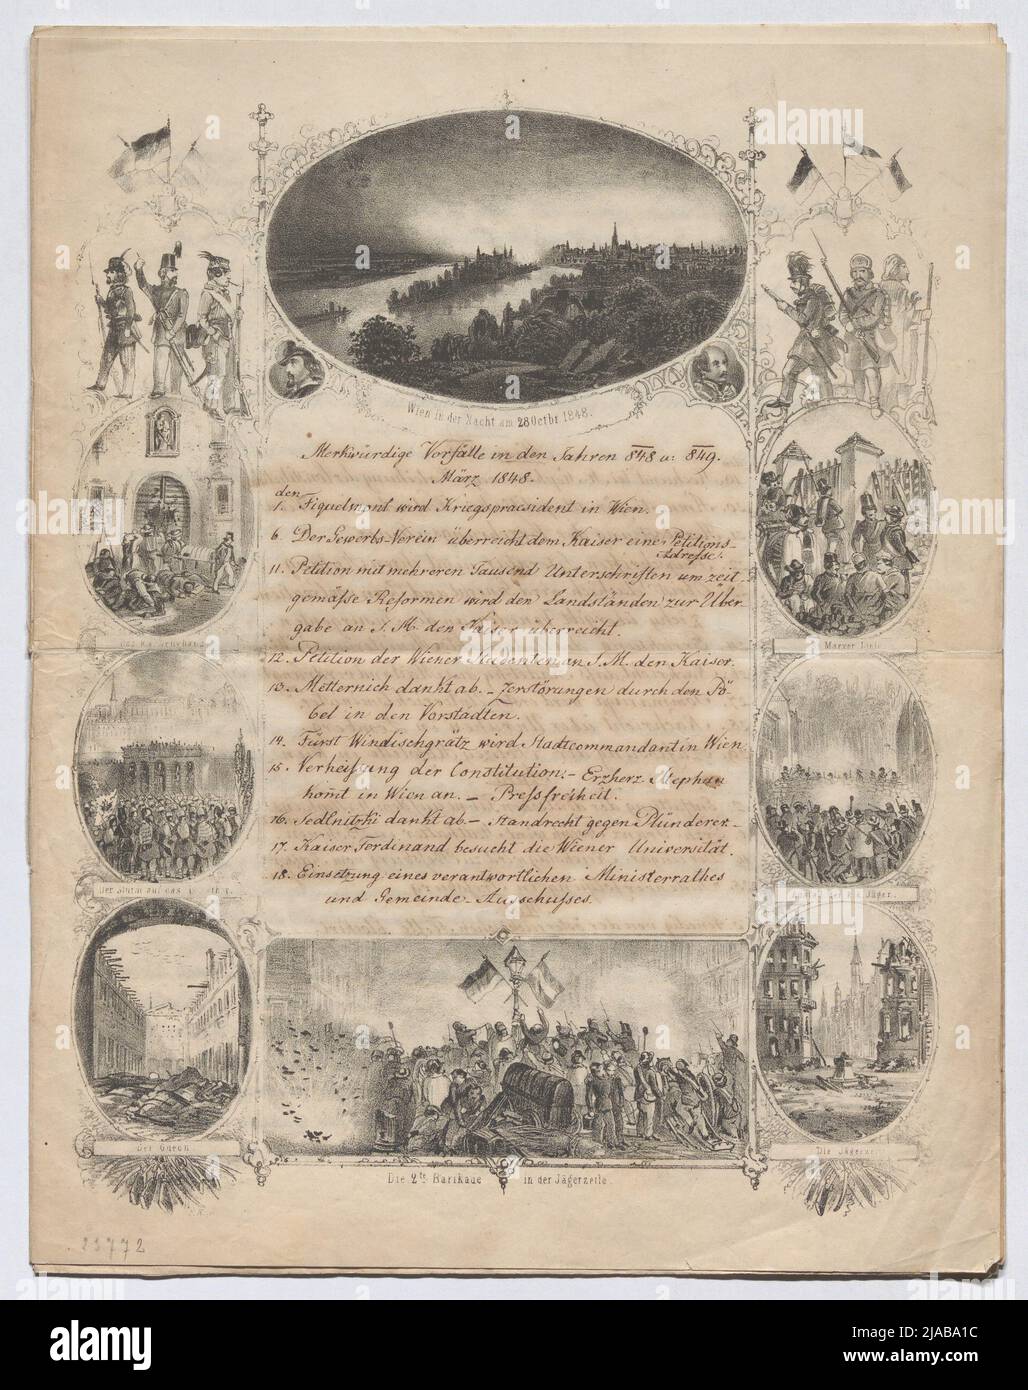 "Strange incidents in the years 848 U: 849". (Calendar of the Revolution of 1848/49). Franz Kaliwoda, Lithograph Stock Photo